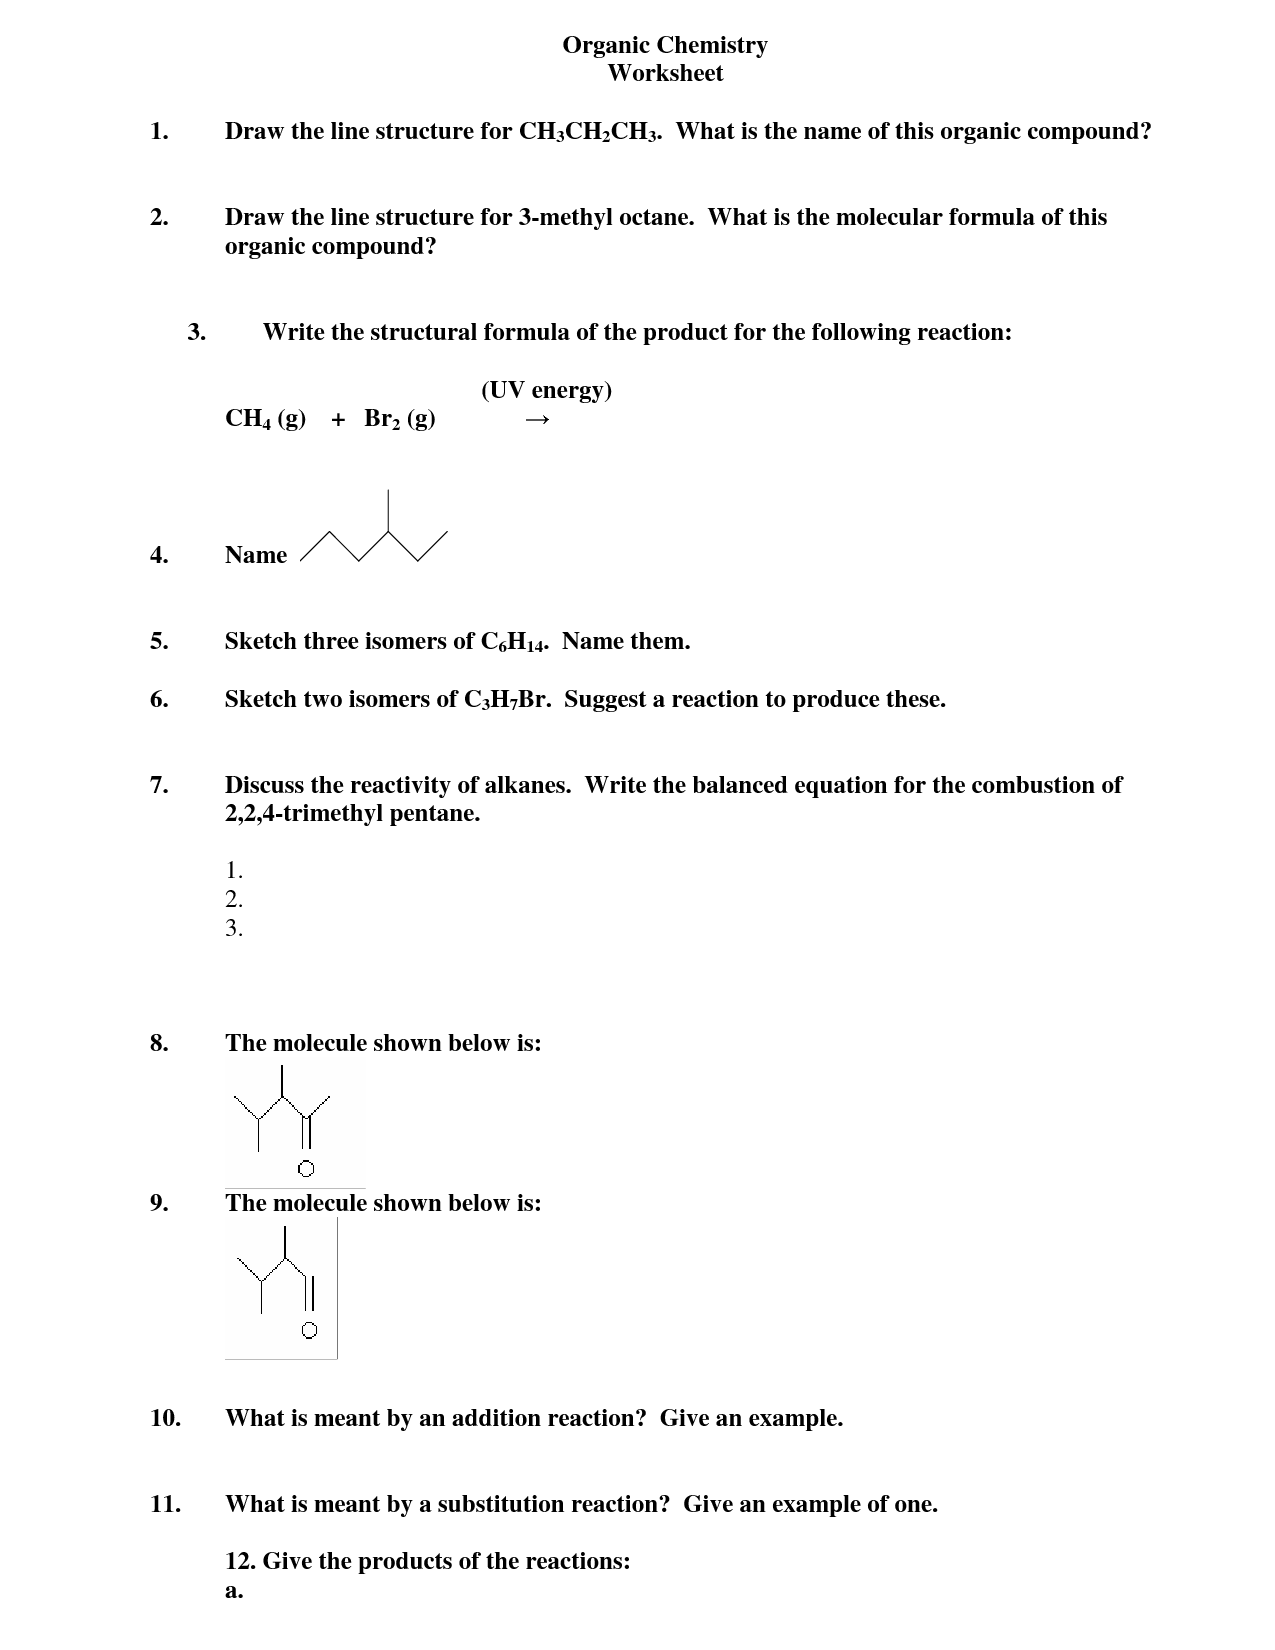 Organic Compounds Structure Worksheet